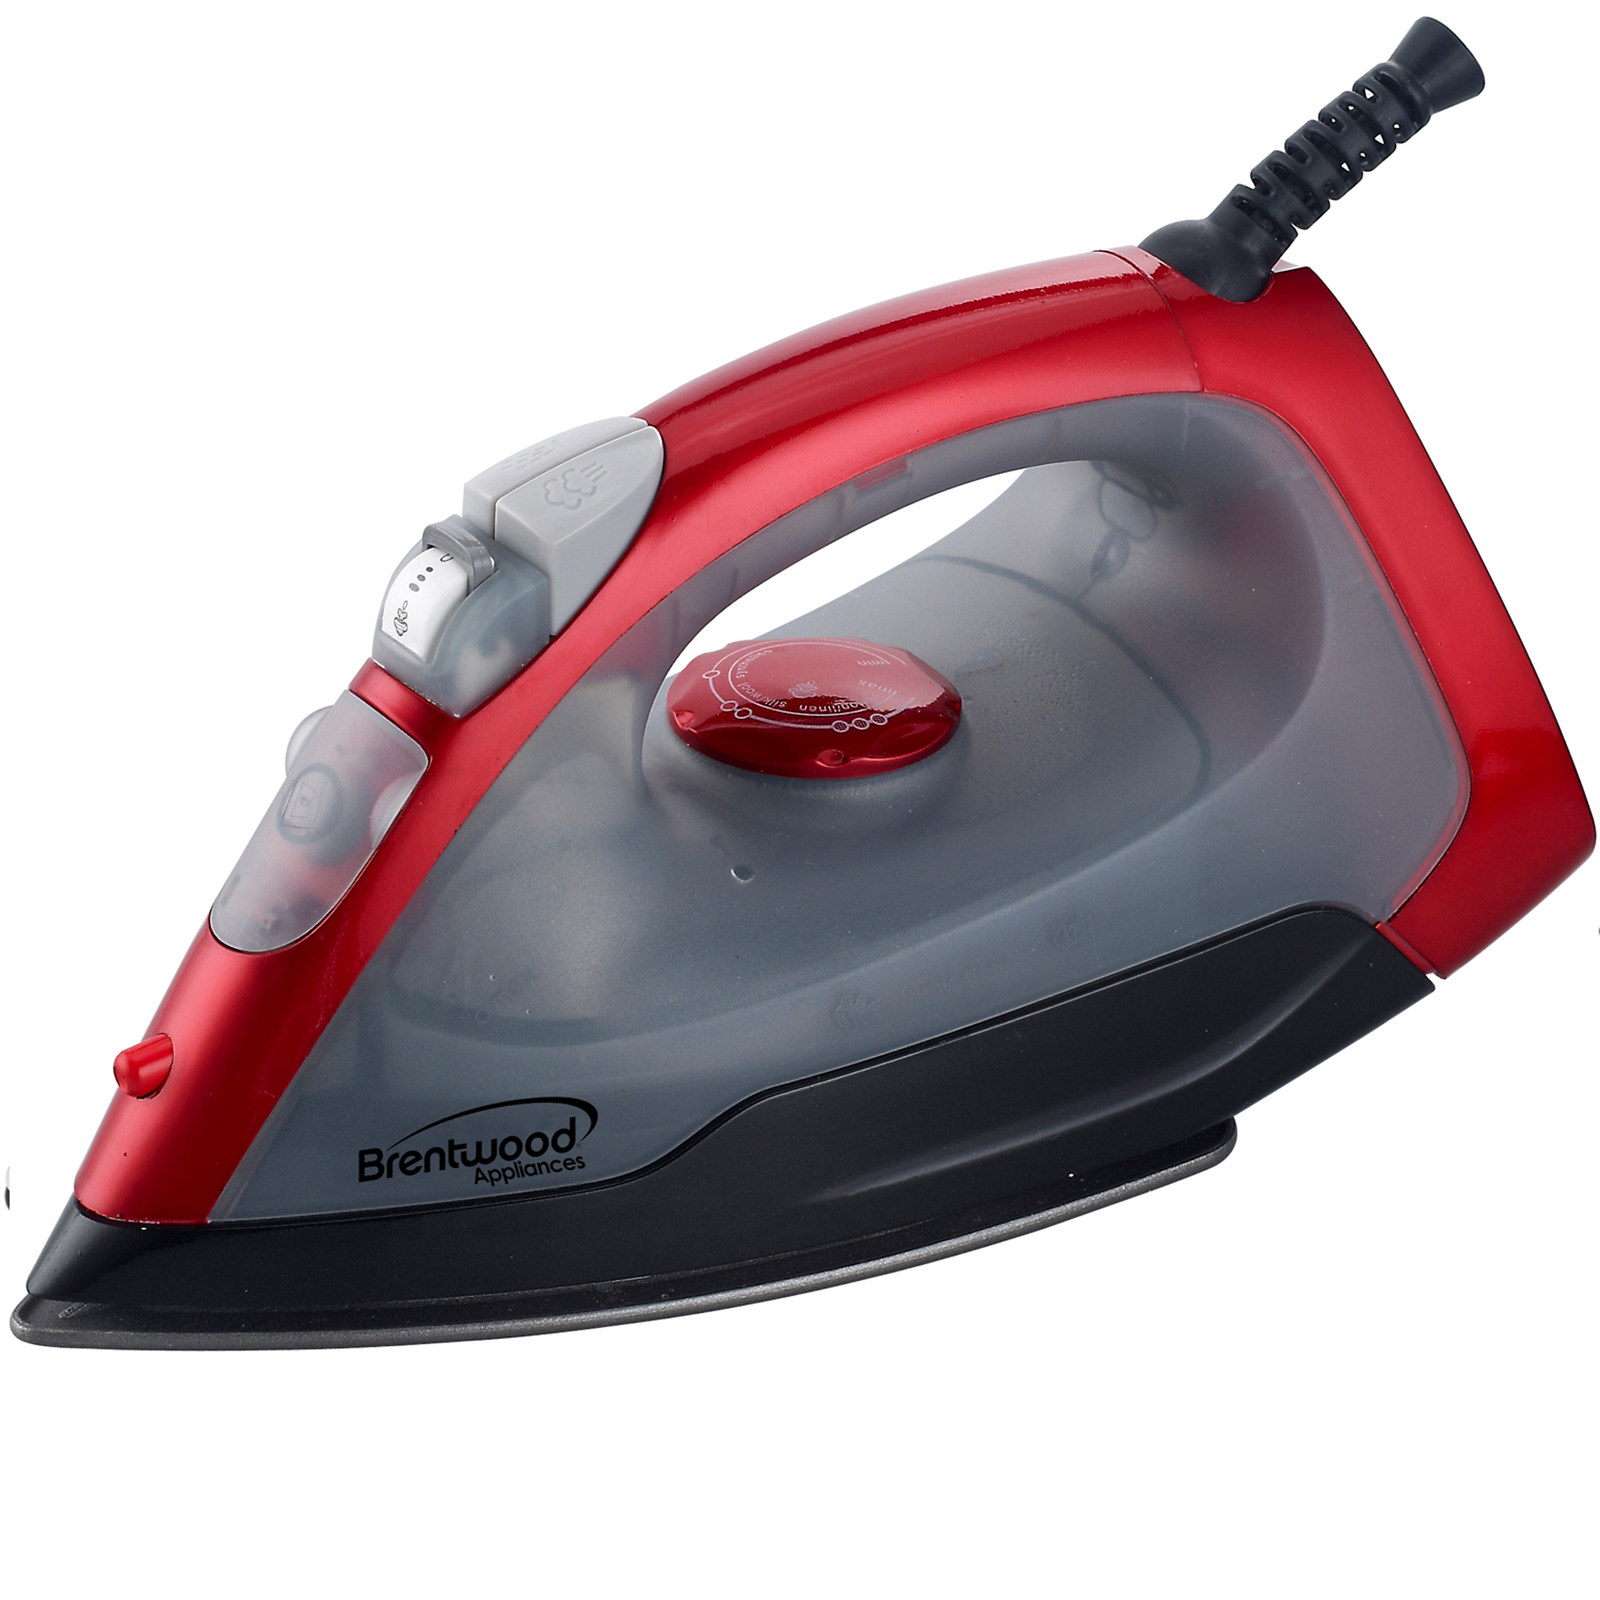 Brentwood 97083303M Full Size Steam/Spray/Dry Iron